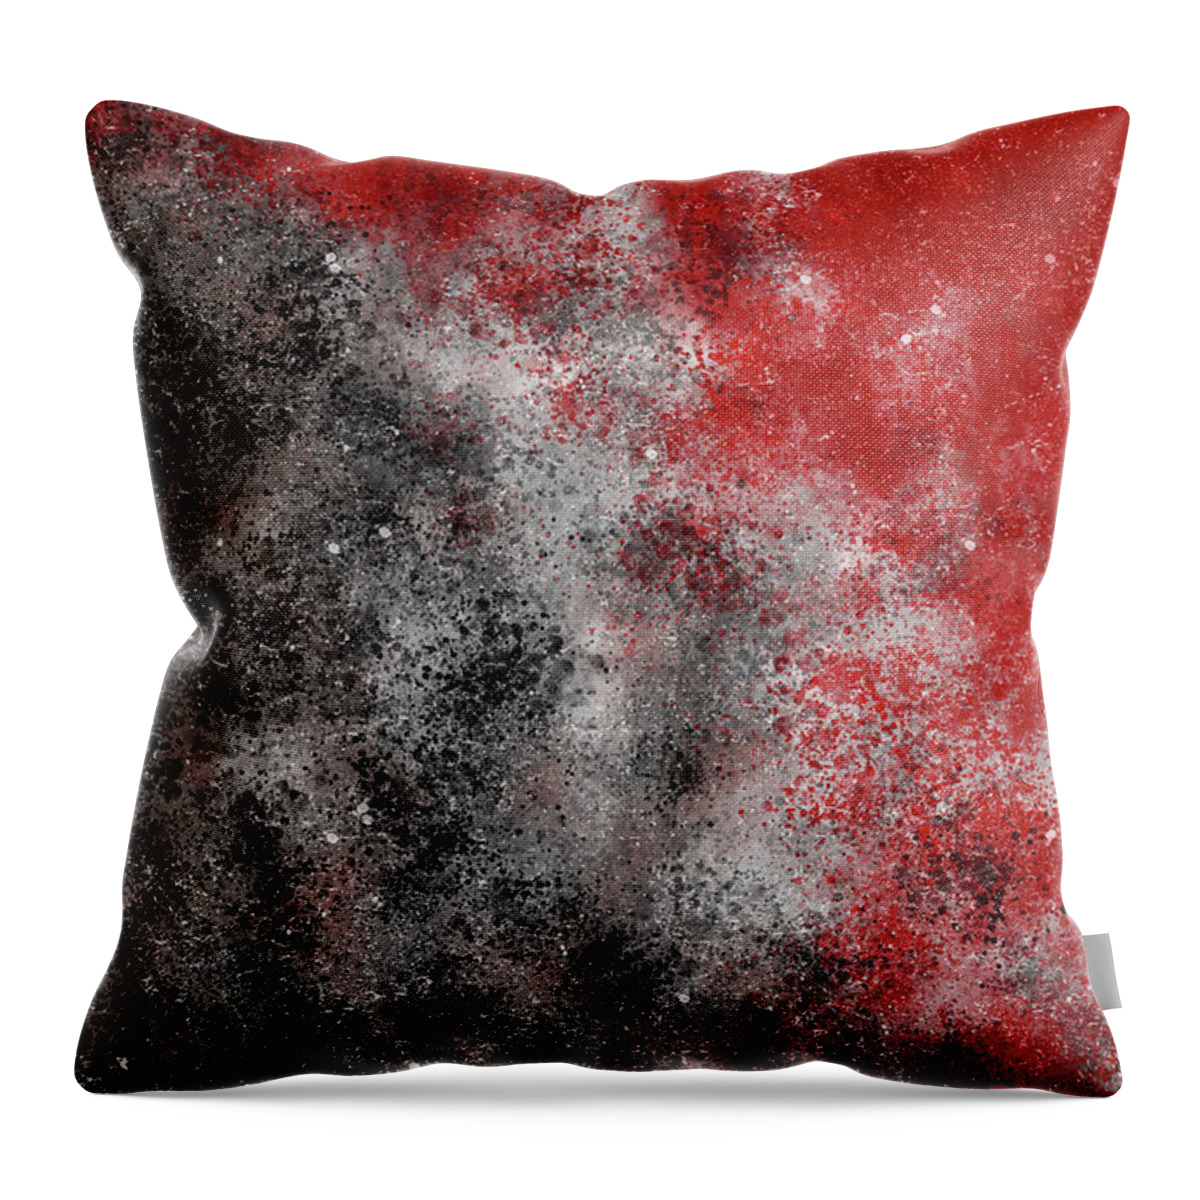 Inner Revolution Throw Pillow featuring the mixed media Inner Revolution 3 - Contemporary, Modern - Abstract Expressionist painting - Red, Black, White by Studio Grafiikka